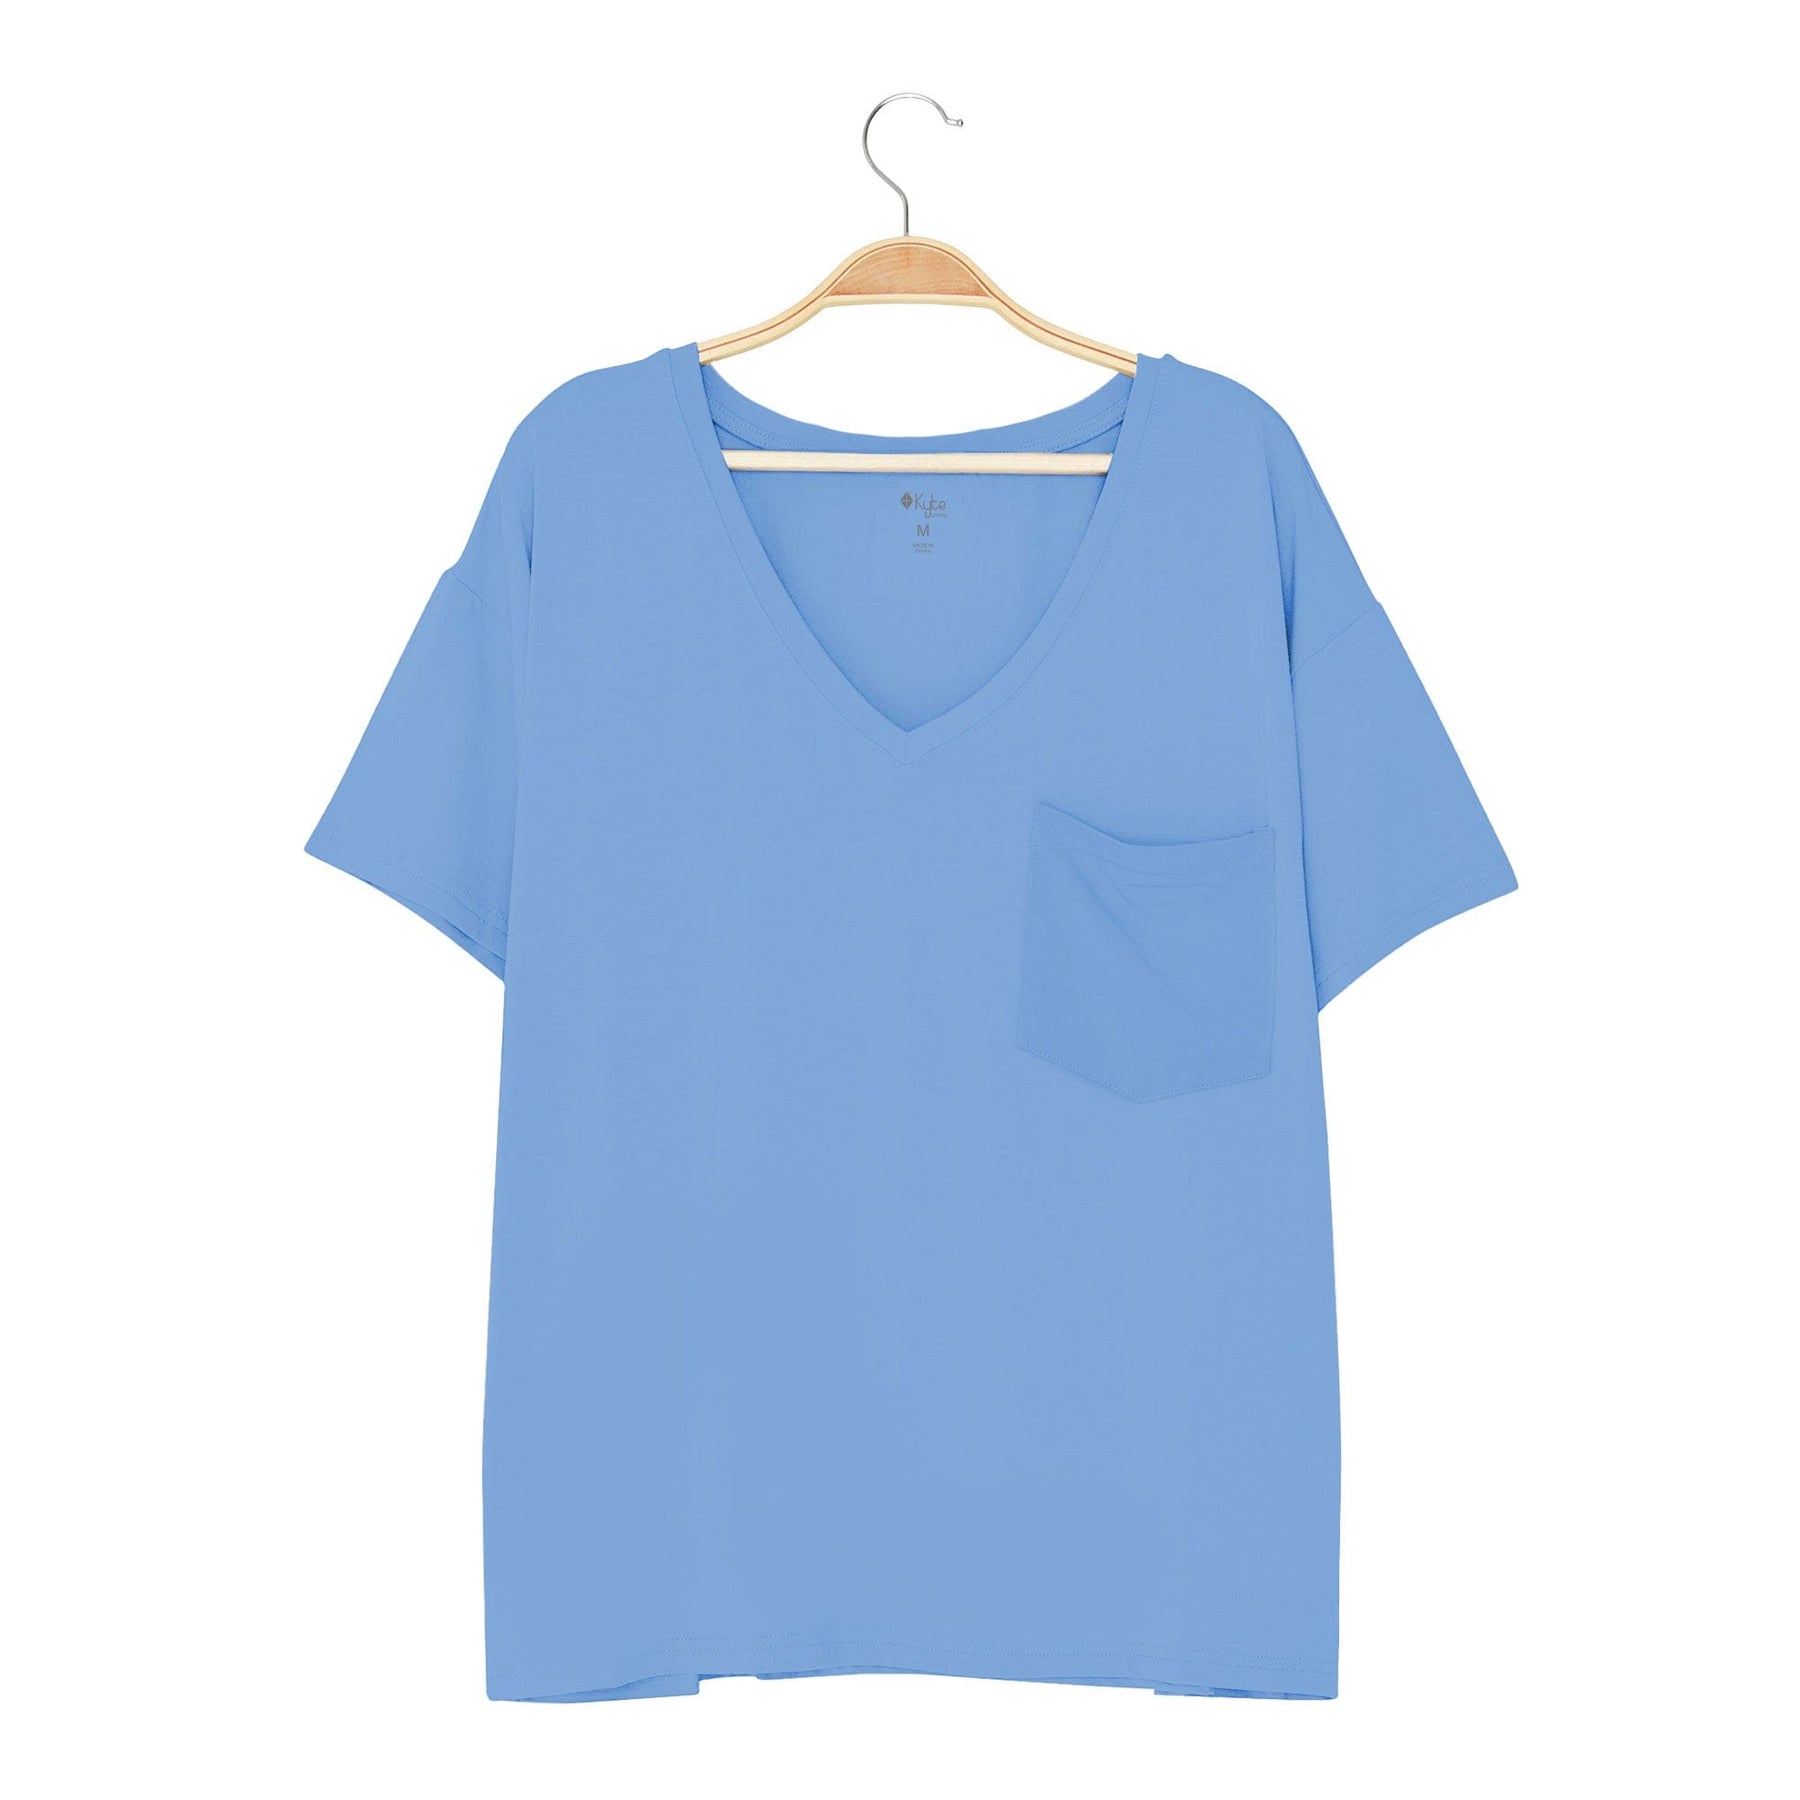 Kyte BABY Women's V-Neck Women’s Relaxed Fit V-Neck in Periwinkle